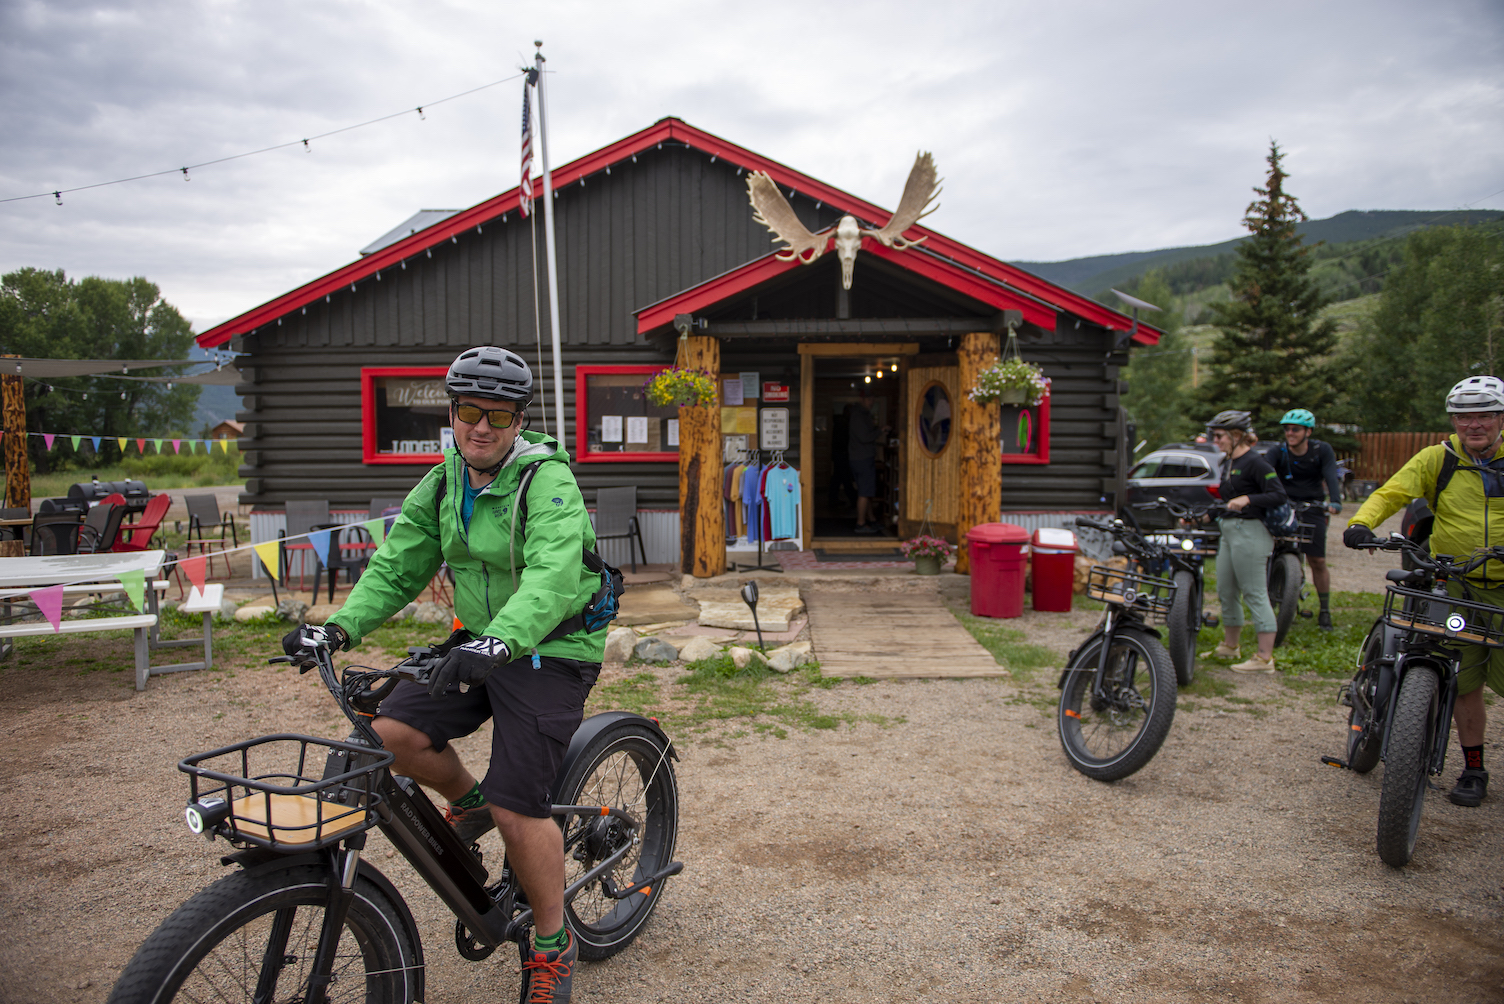 People on bikes in front of a log cabin building with moose antlers mounted above the door. This lodging in pitkin is the stumbling moose lodge